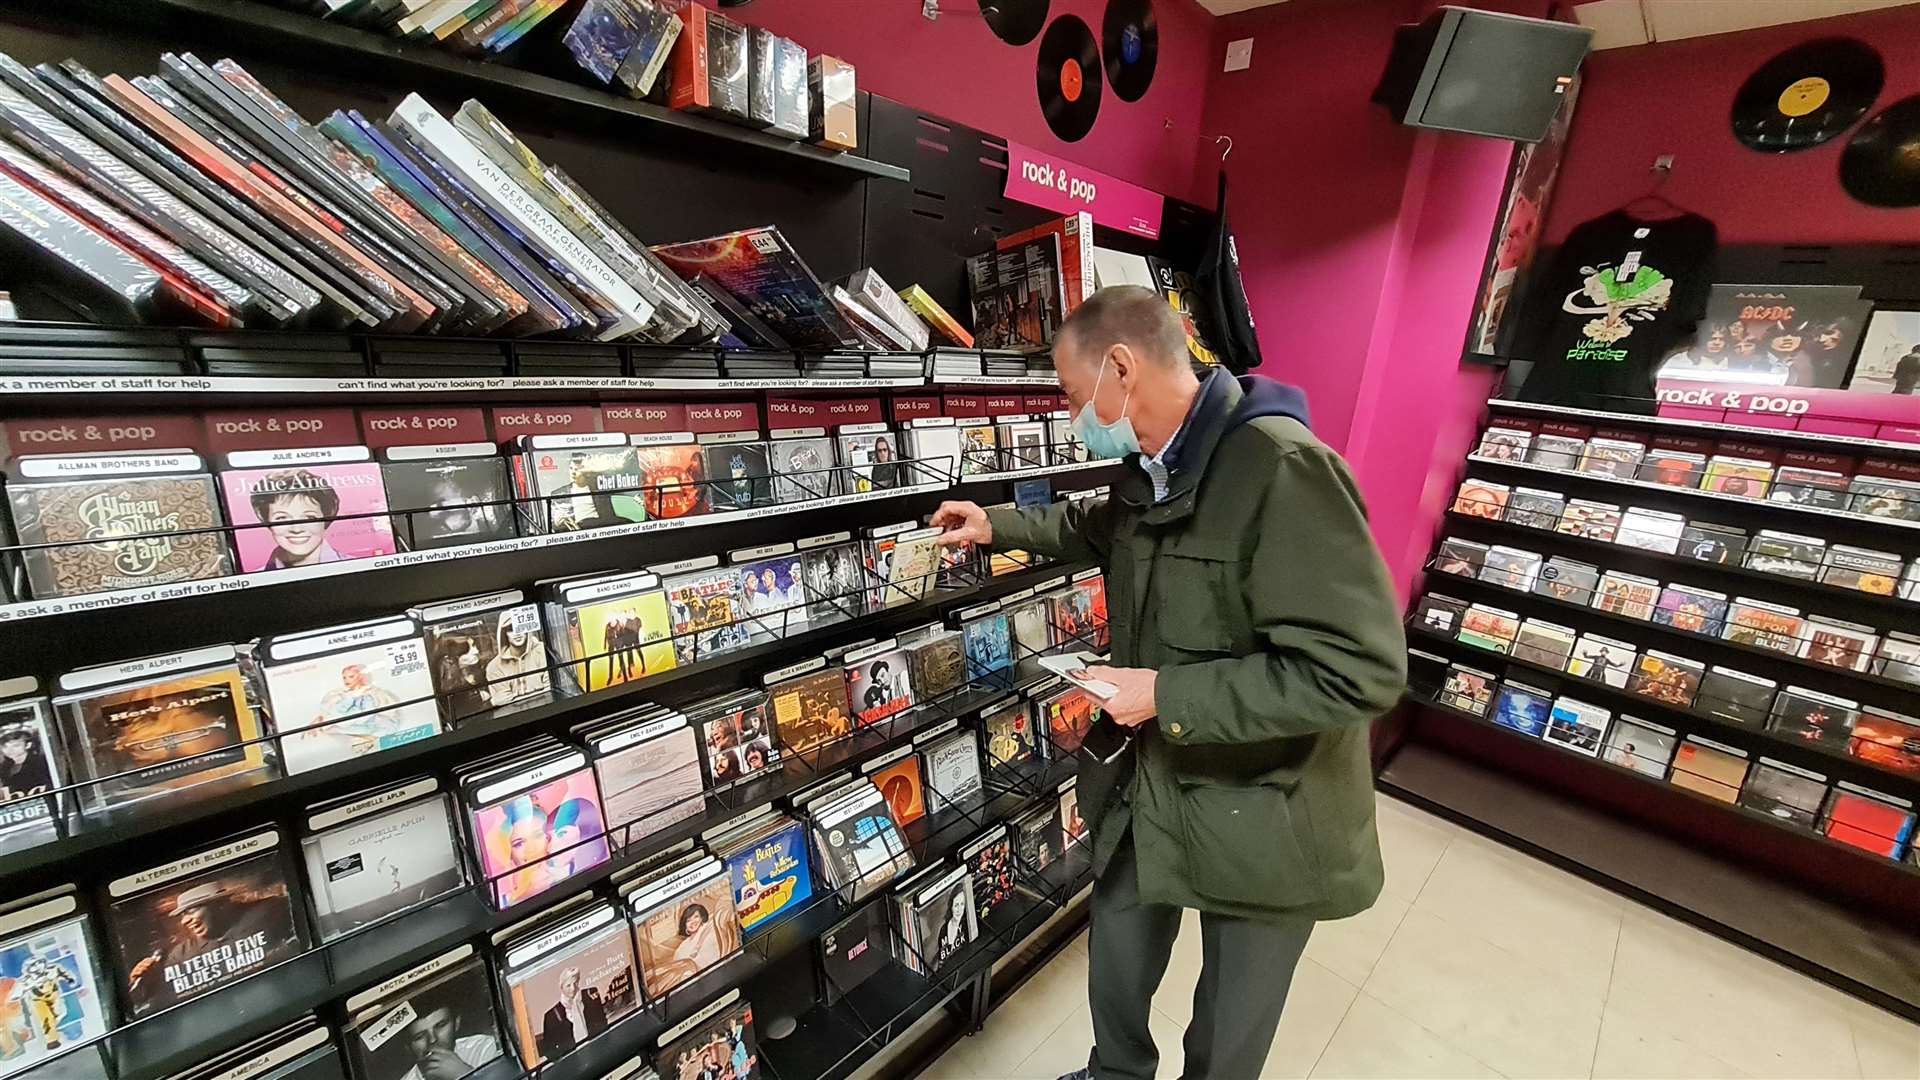 Loyal customer Jim Williams browses the selection of CDs - he has a collection of around 1,300